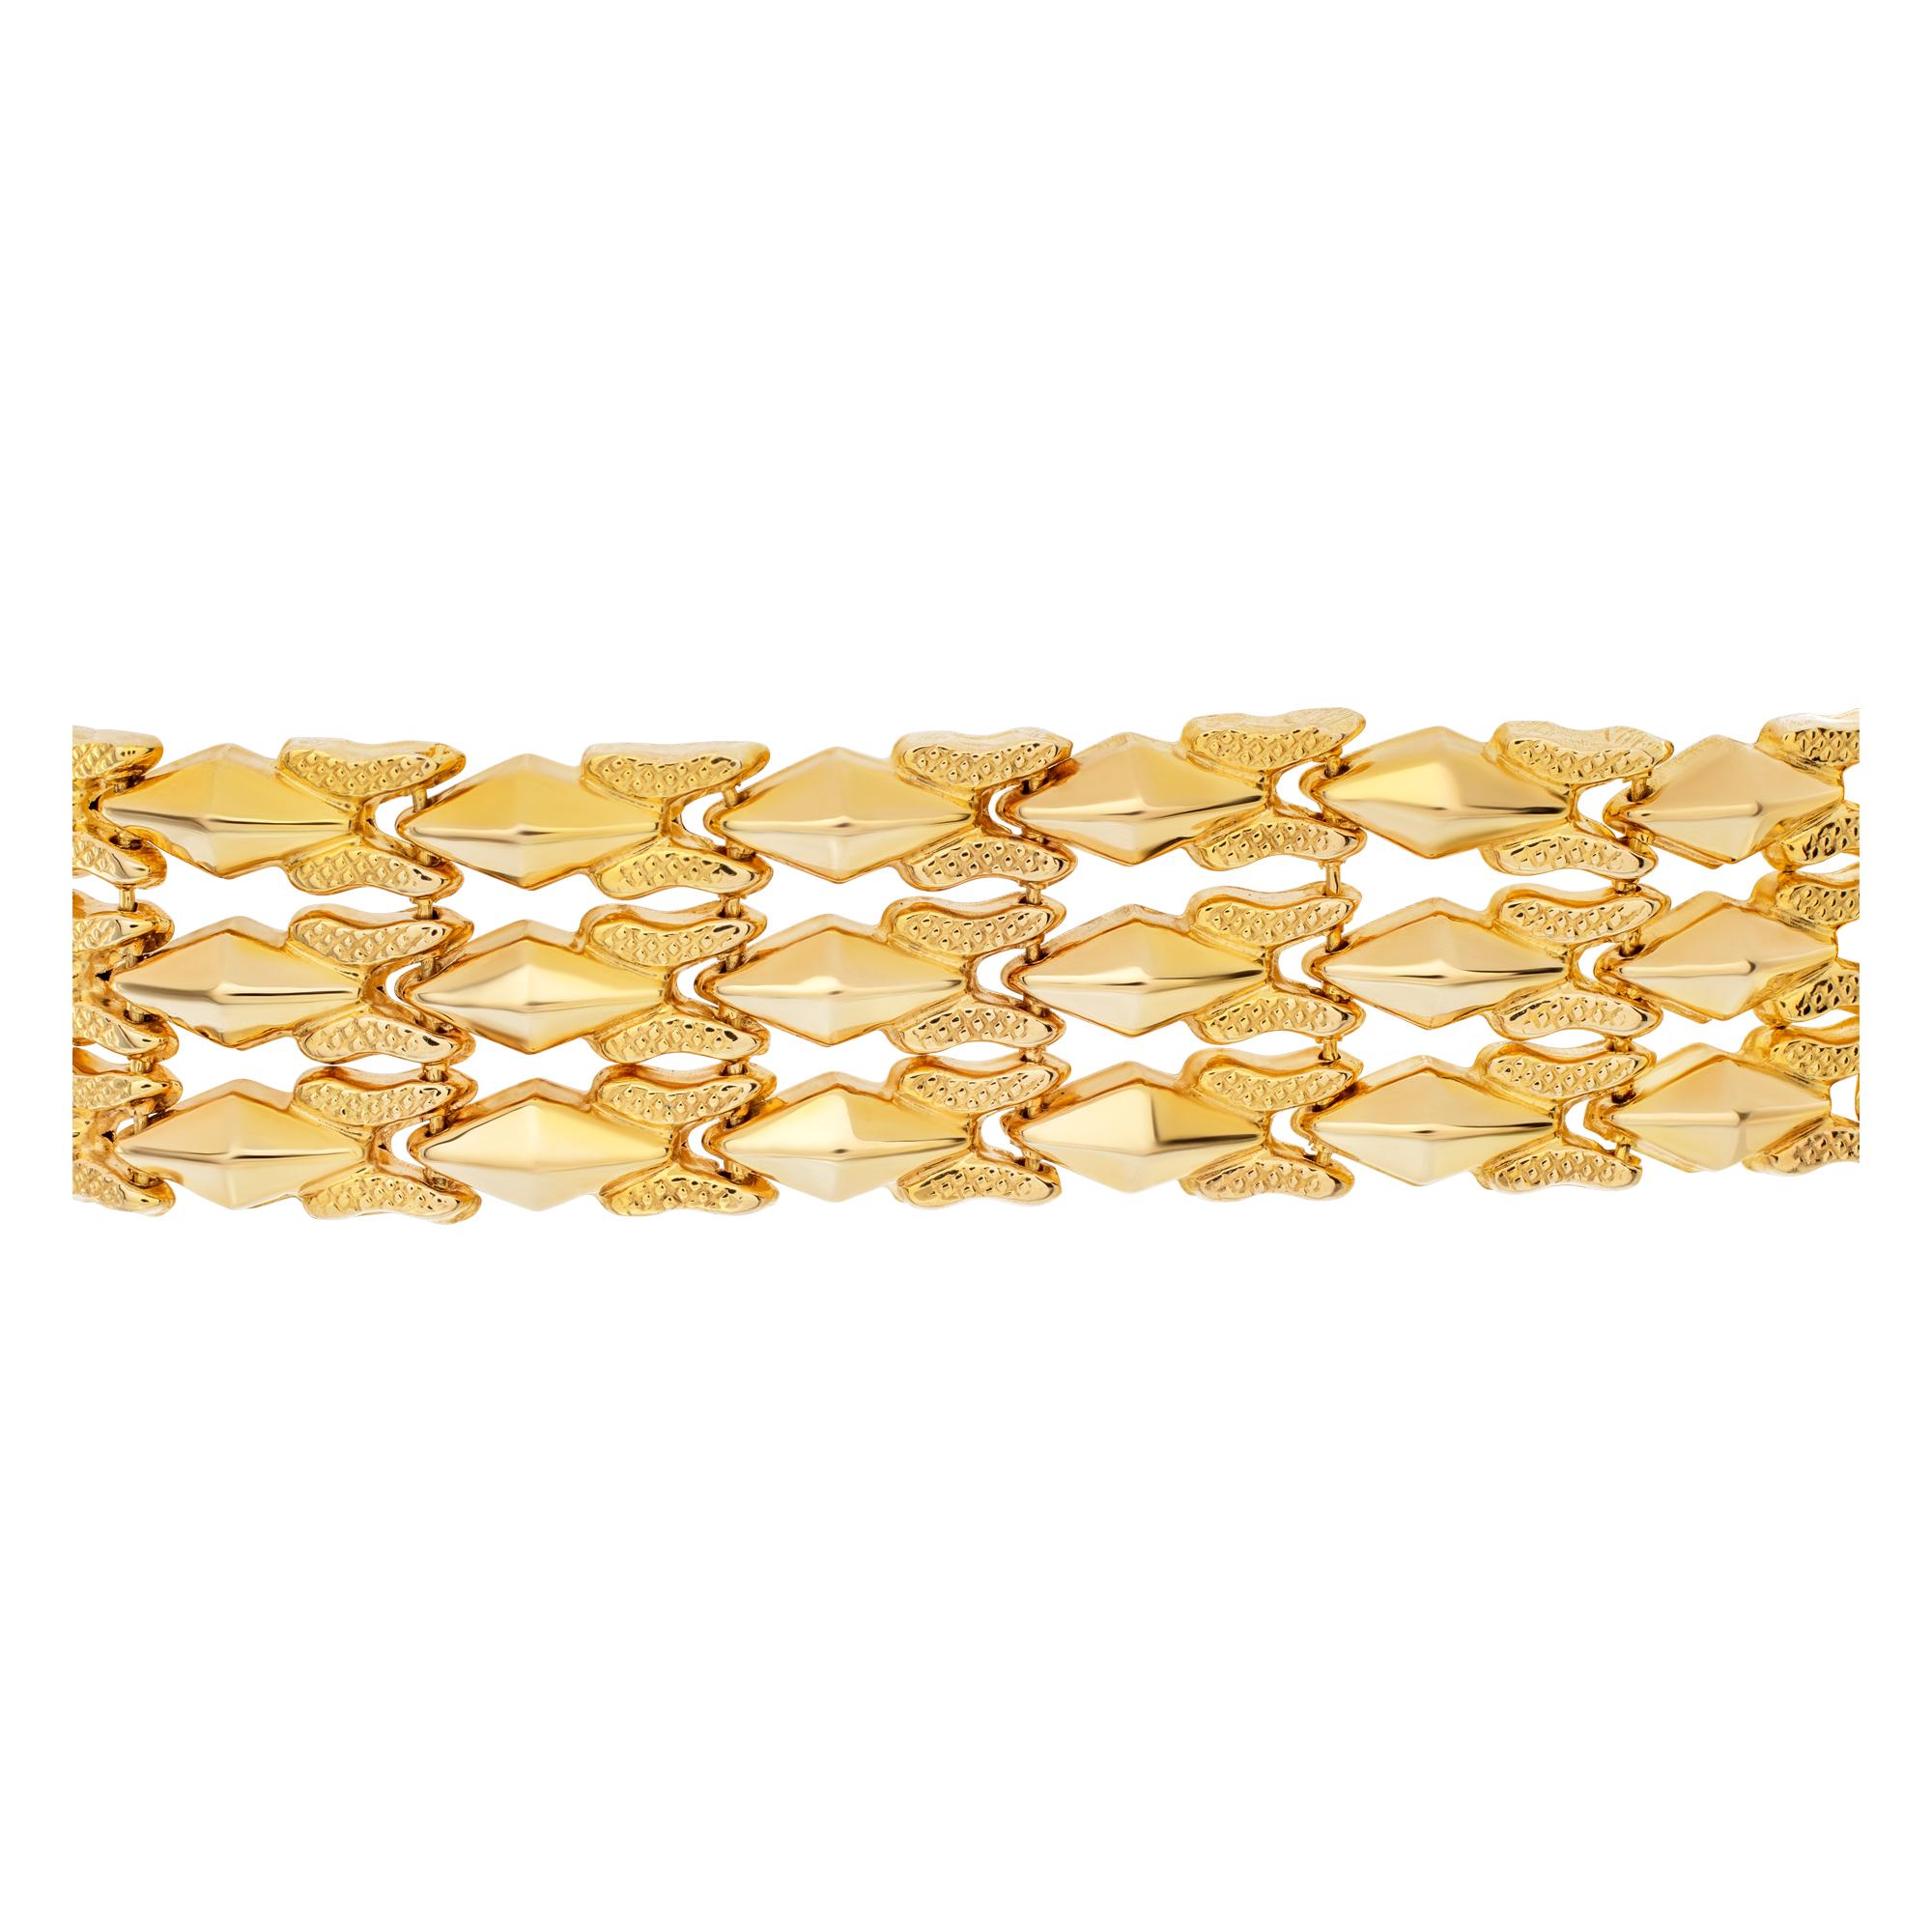 Beautiful wide flexible 18k rose gold bracelet with white gold clasp. Width of bracelet is 0.67inches, length 7.5 inches.
